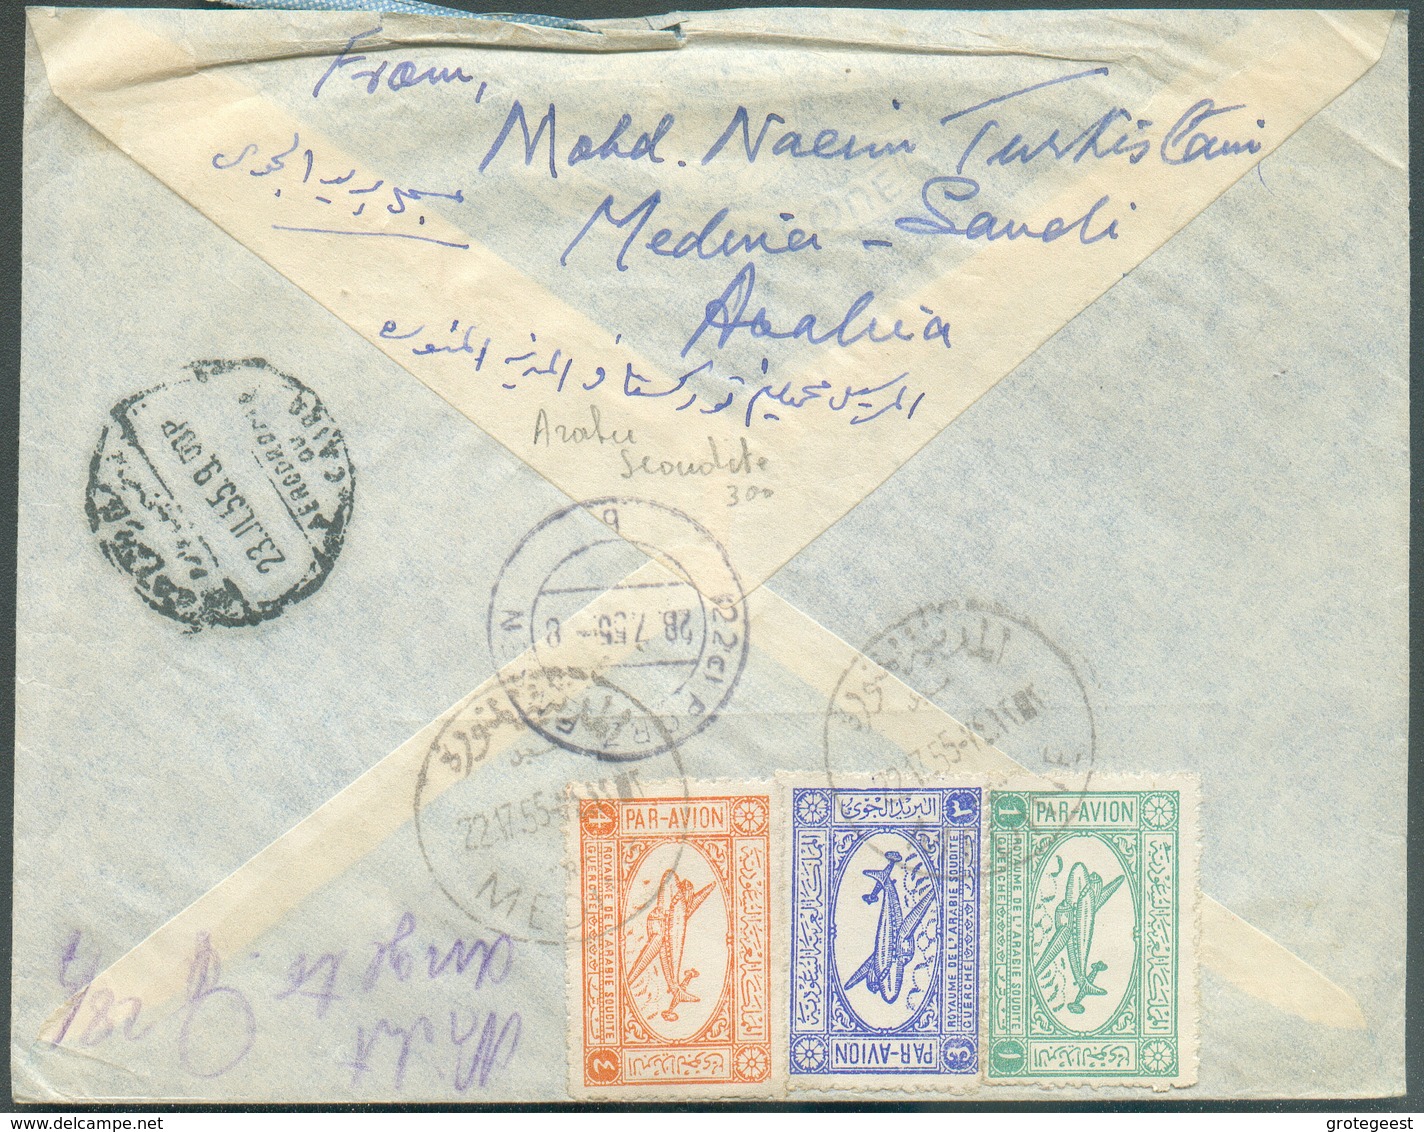 Nice Illustrated Enveloppe (SItes MOSQUEE And MINARET) Franked 1 + 3 + 4 Canc. MEDINE By Airplane To Germany 22 Jul. 195 - Saudi Arabia